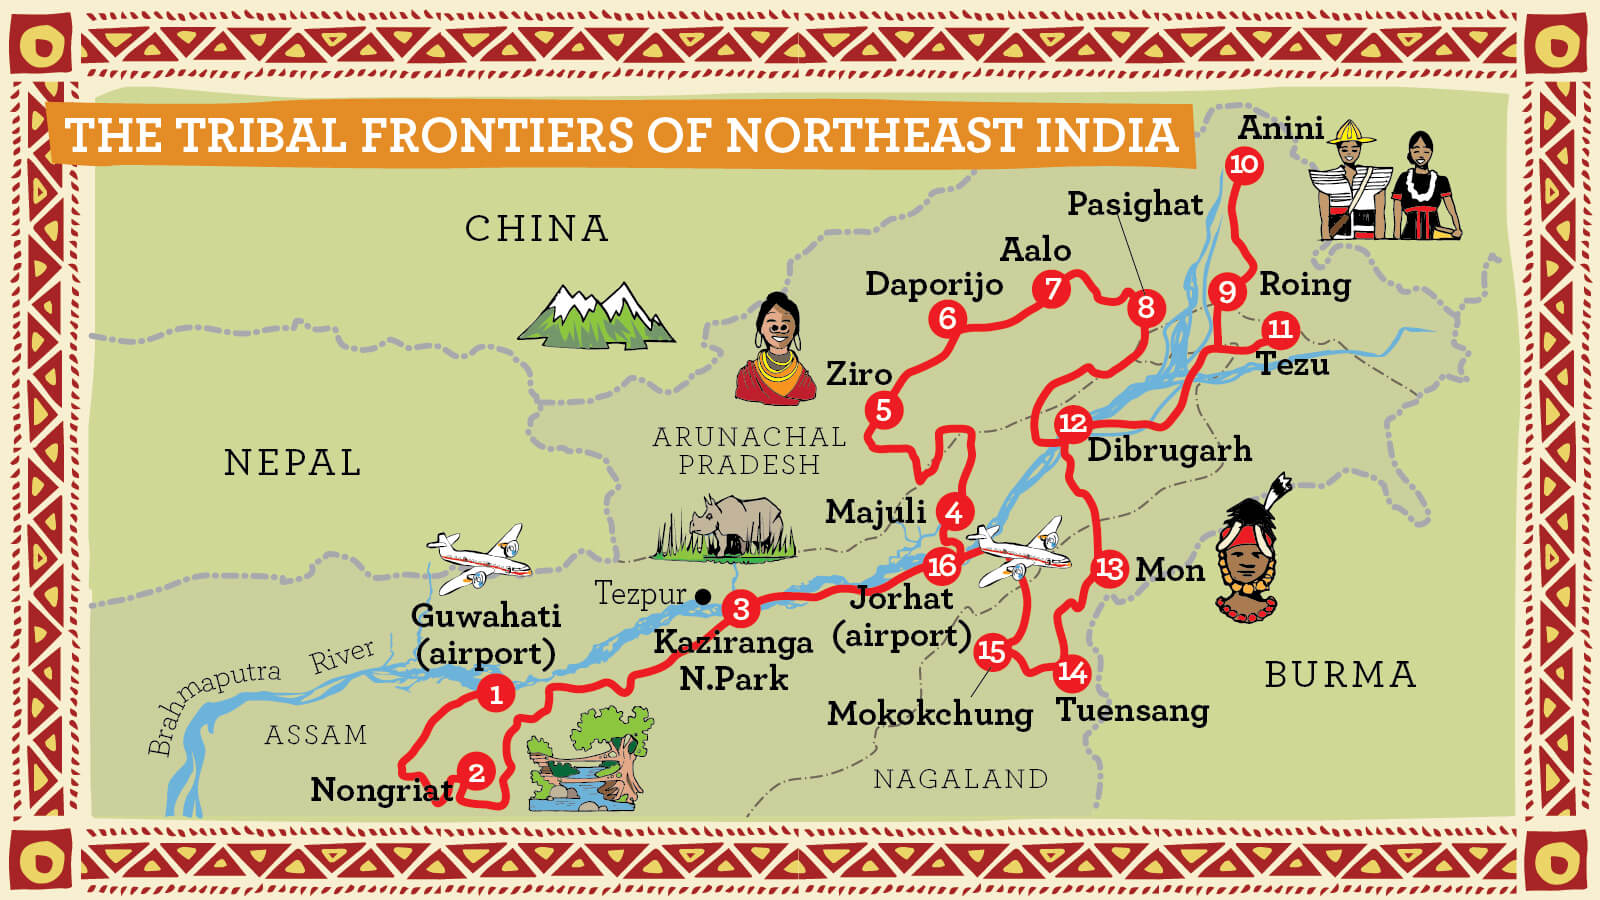 Illustrated Route Map for Northeast India Tribal Tour